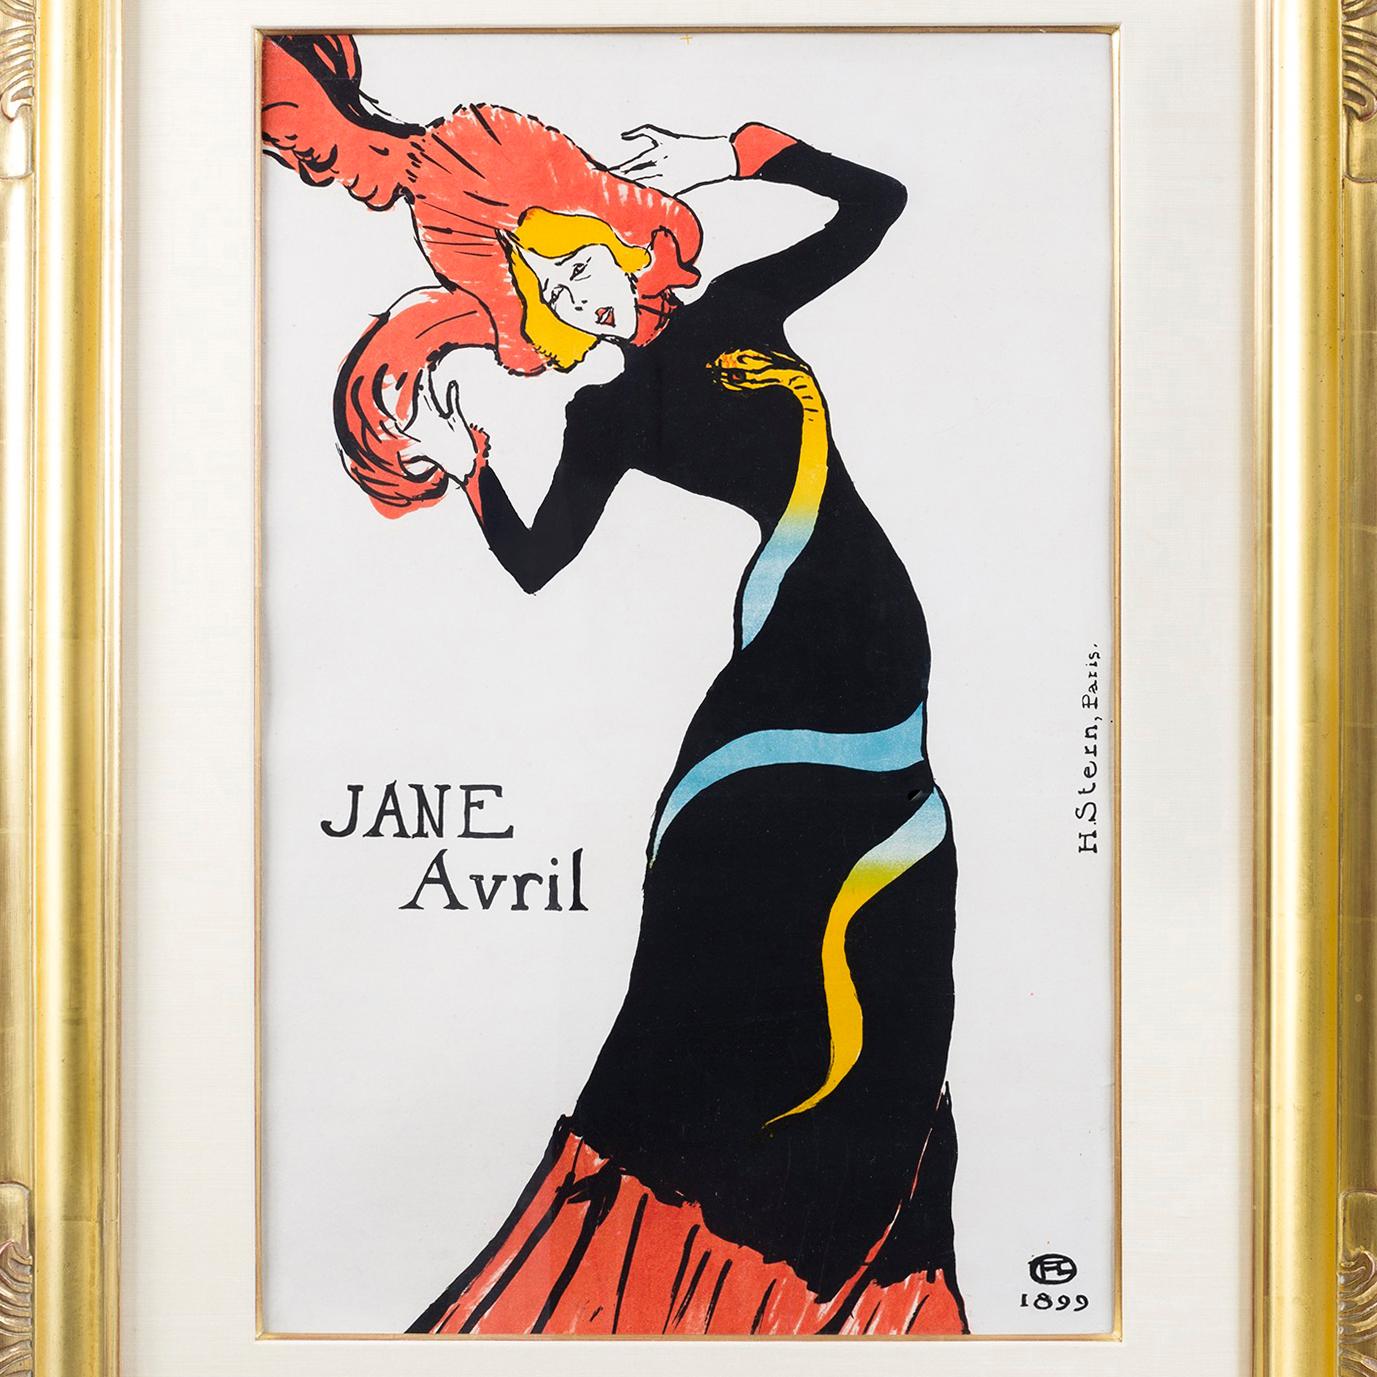 this poster by henri de toulouse-lautrec of jane avril celebrates which aspect of parisian life